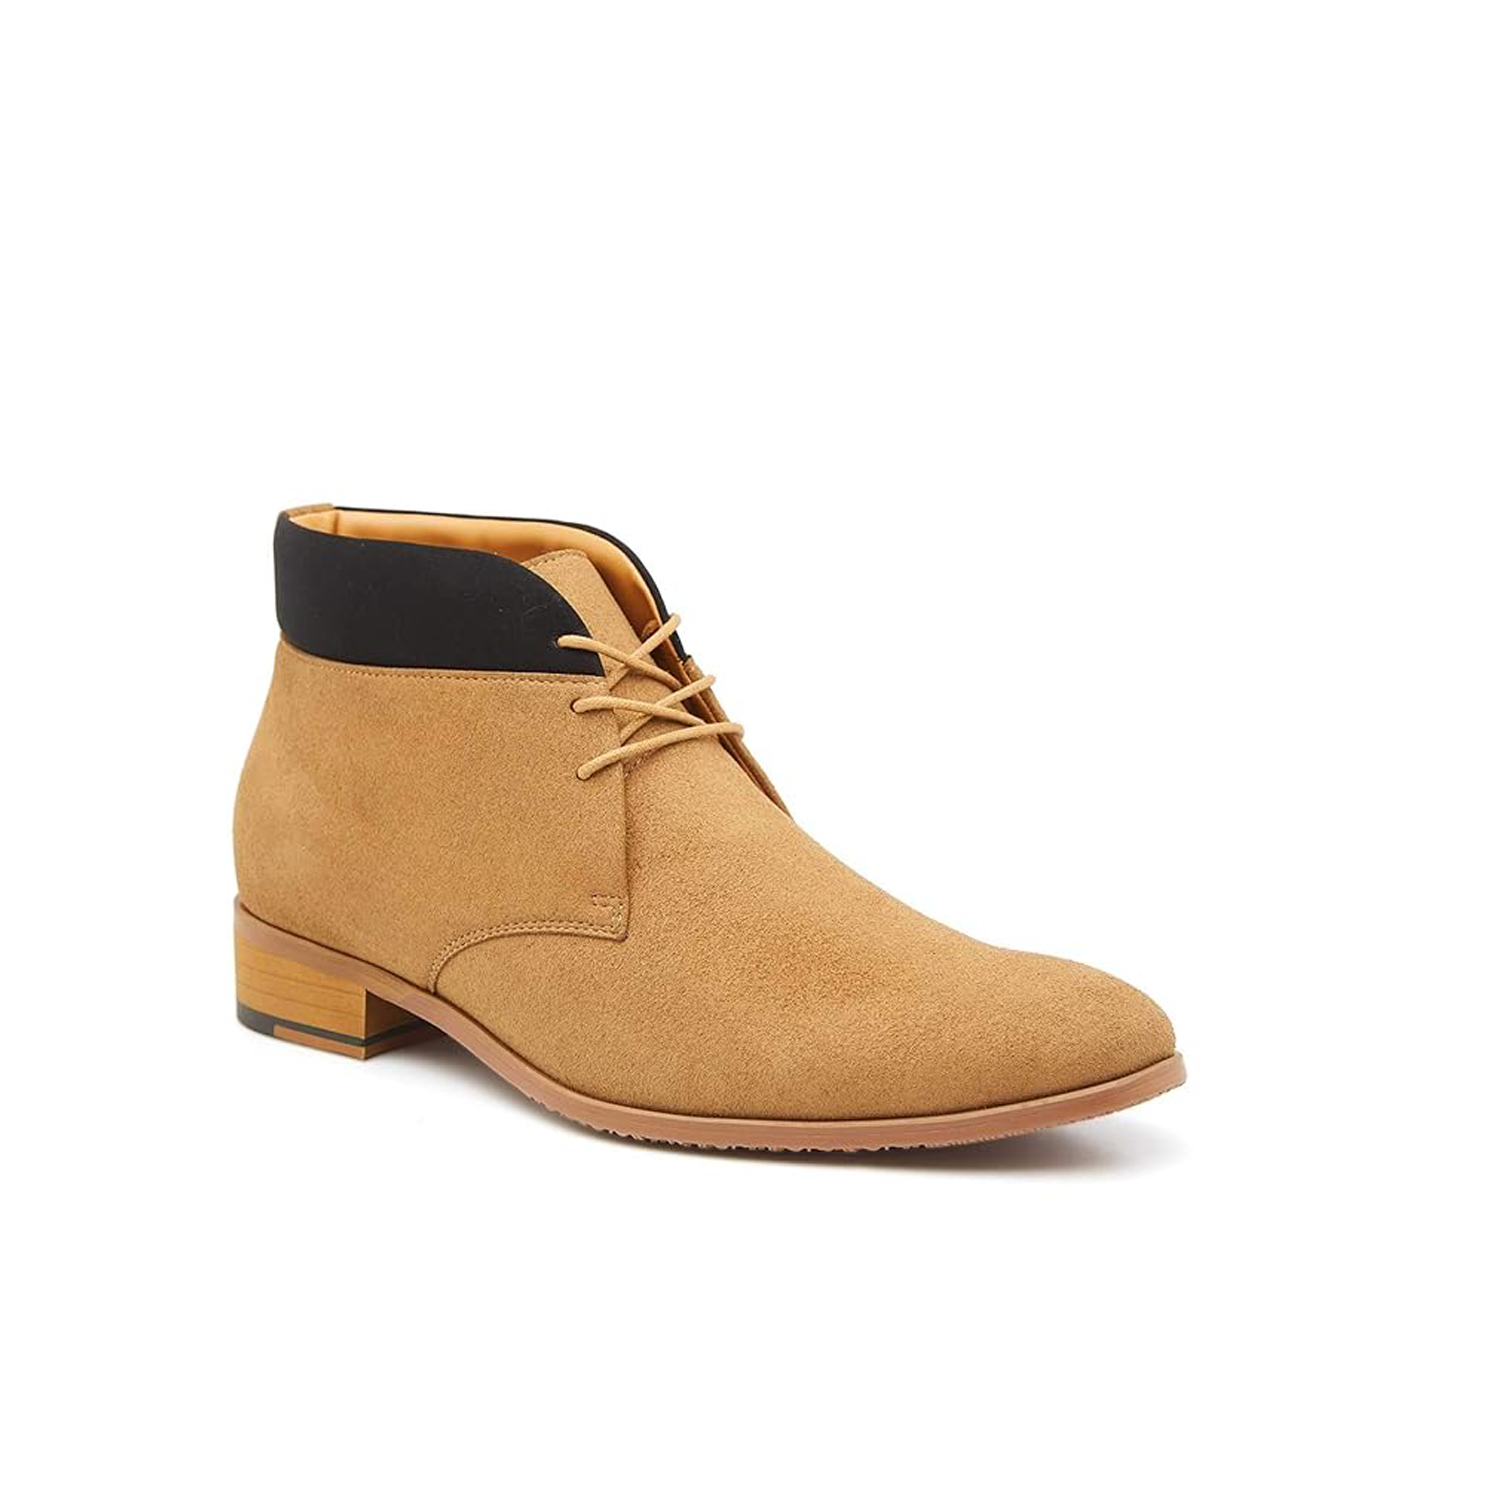 Veto Height Increasing Men’s Ankle Boots – 2.5 Inches